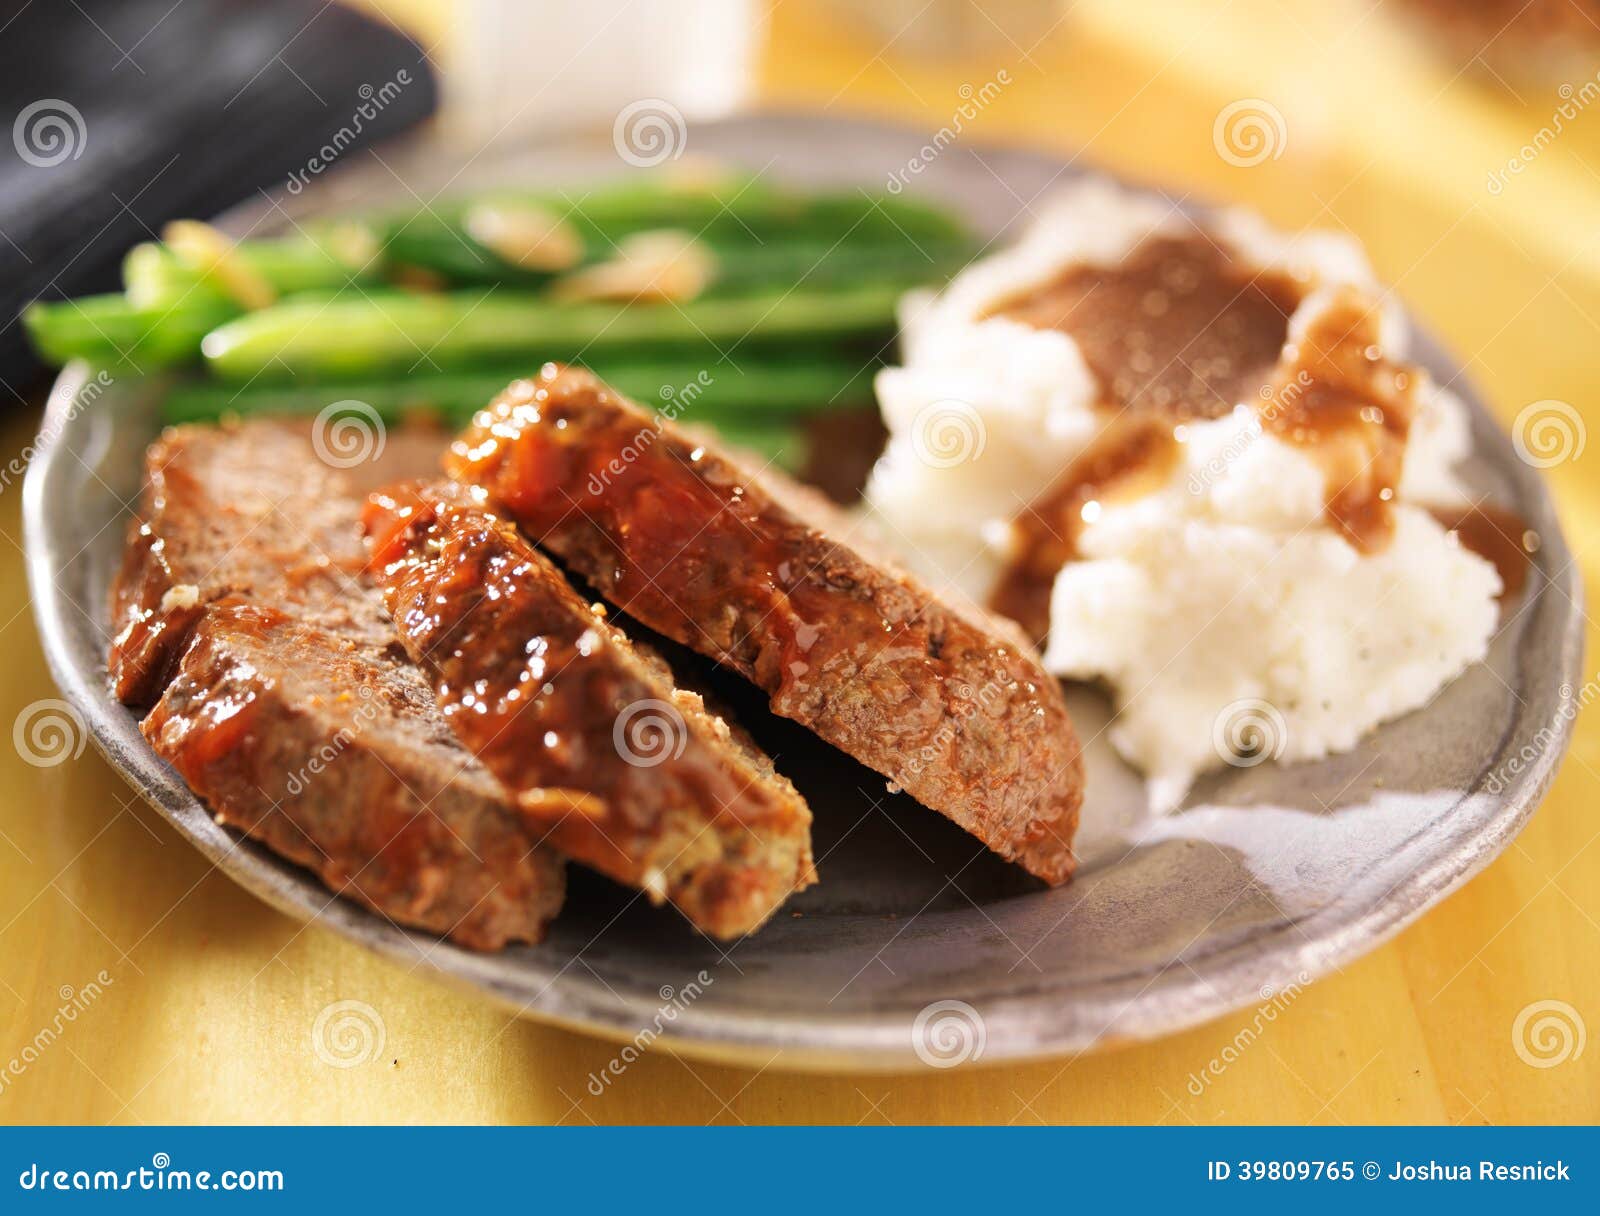 meatloaf with greenbeans and mashed potatoes